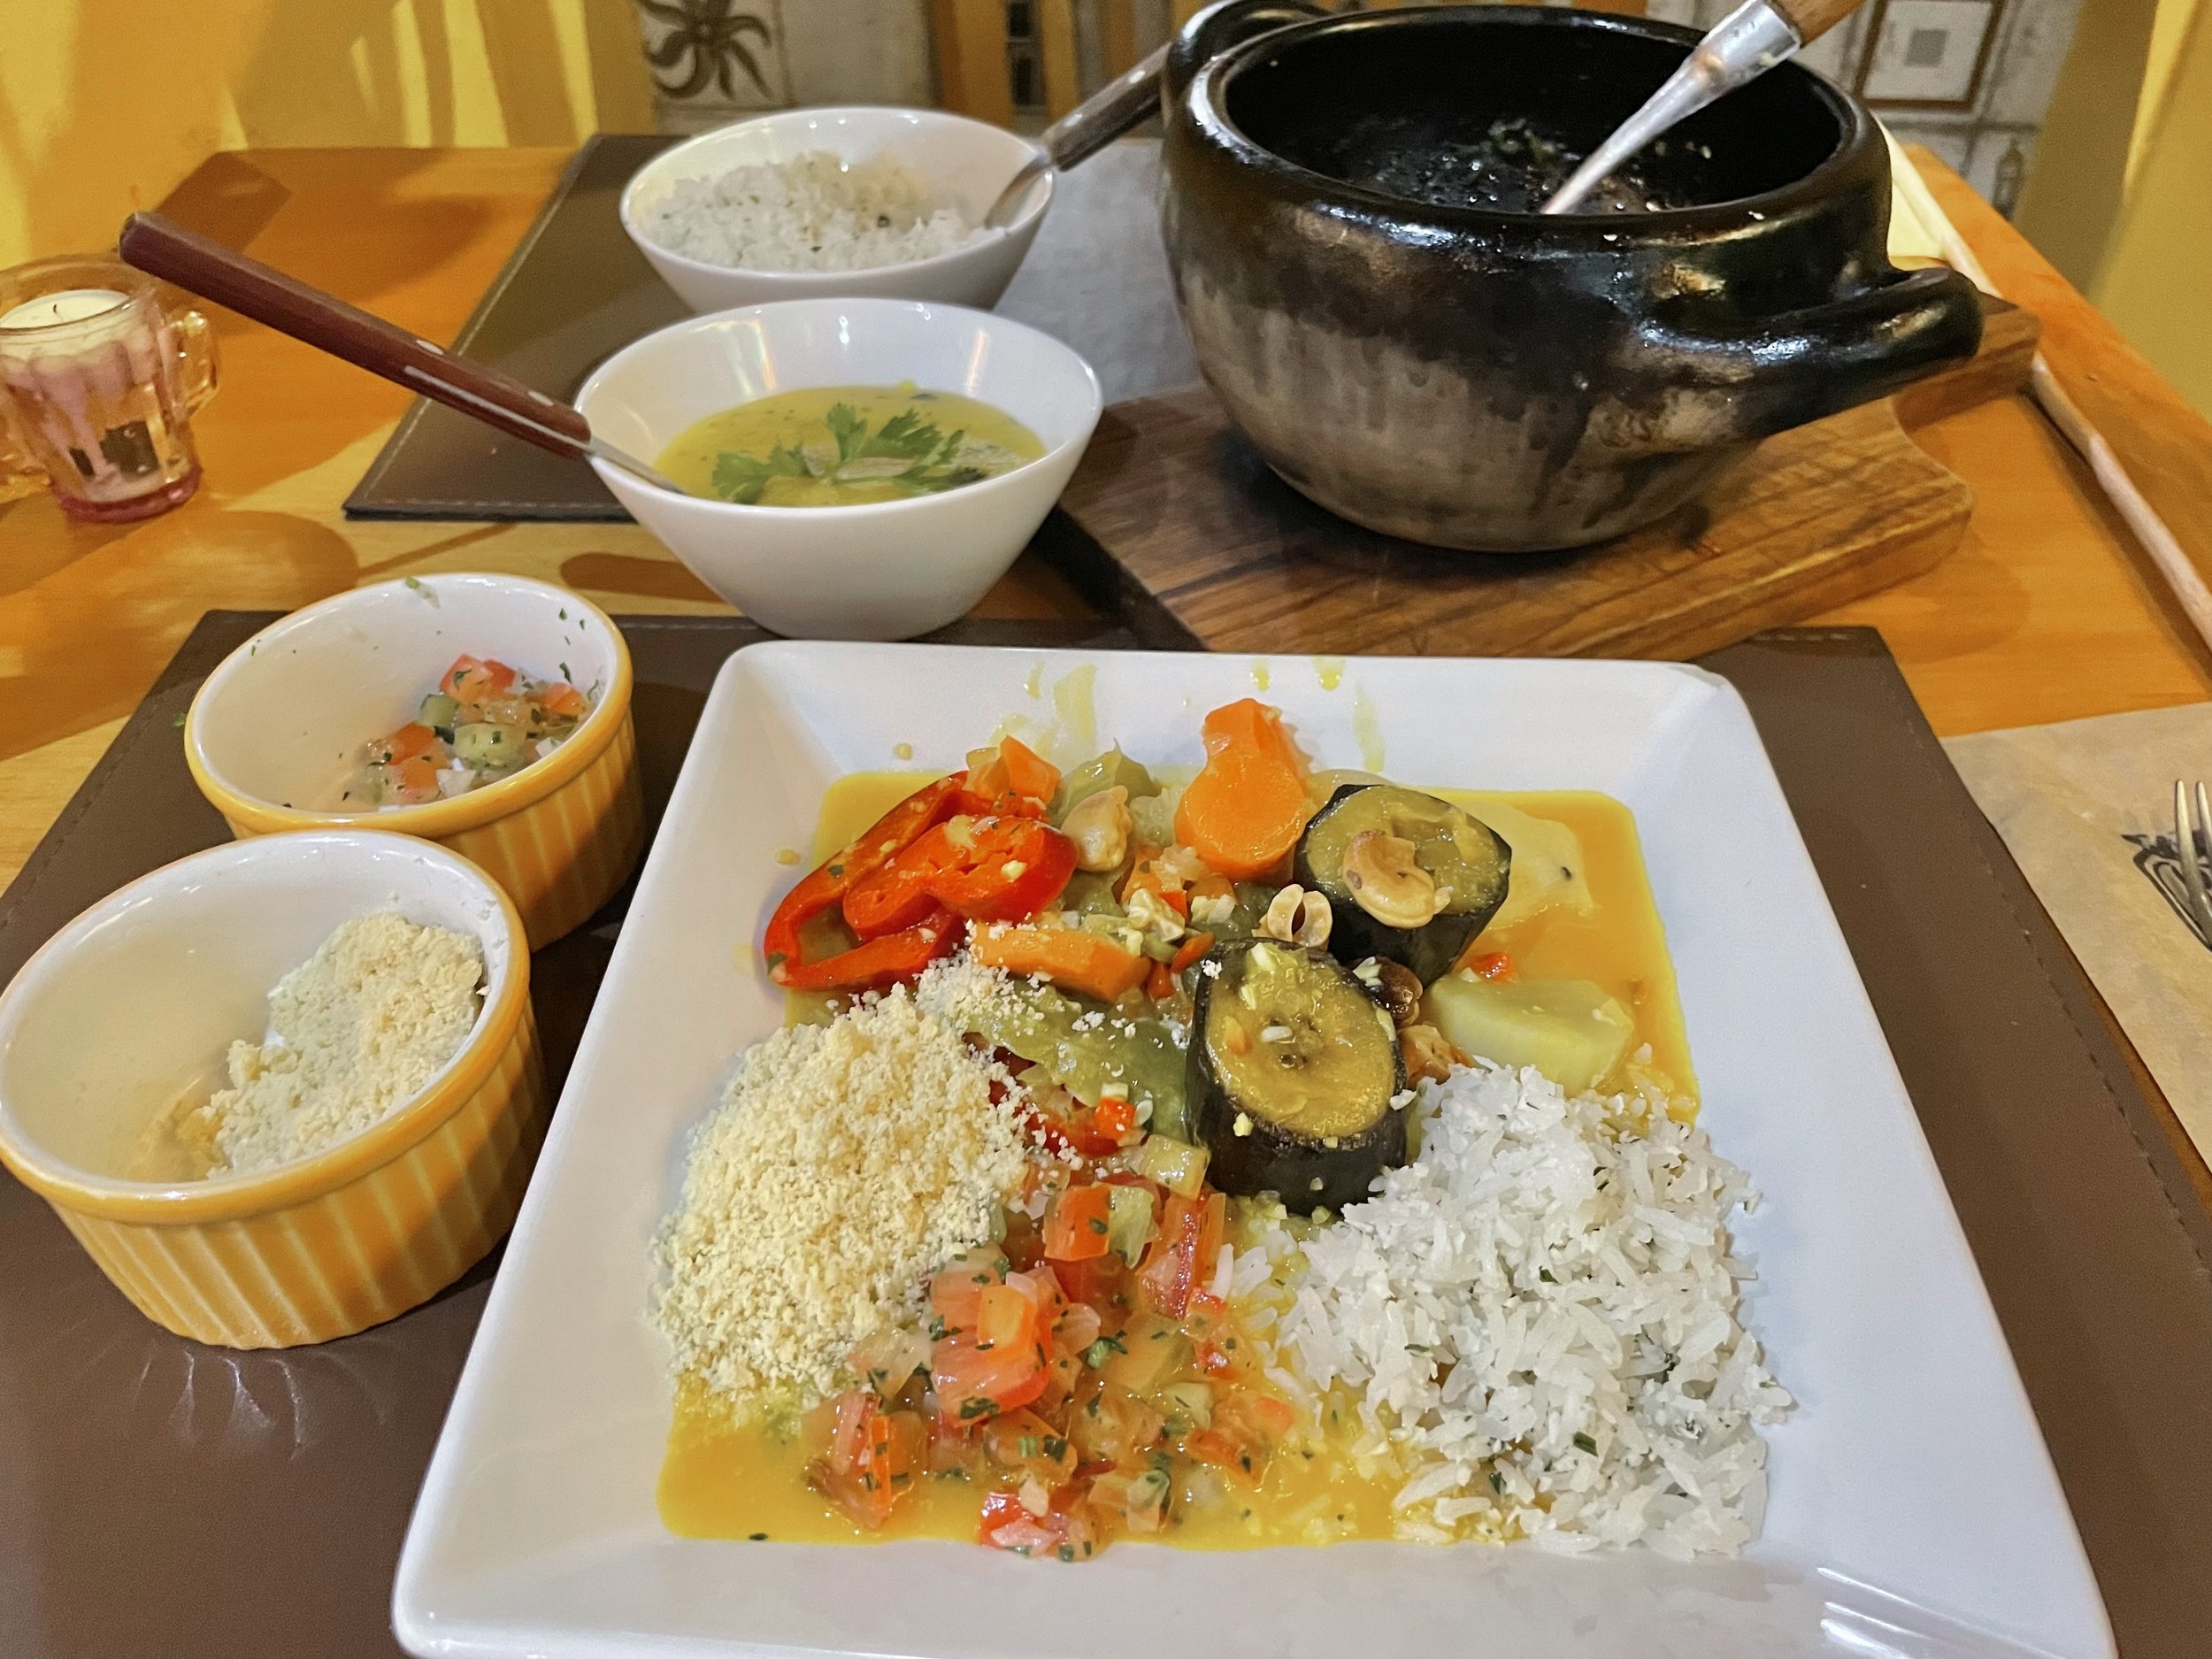 Moqueca: An explosion of flavors cooked in an earthen pot and served with rice and farofa.